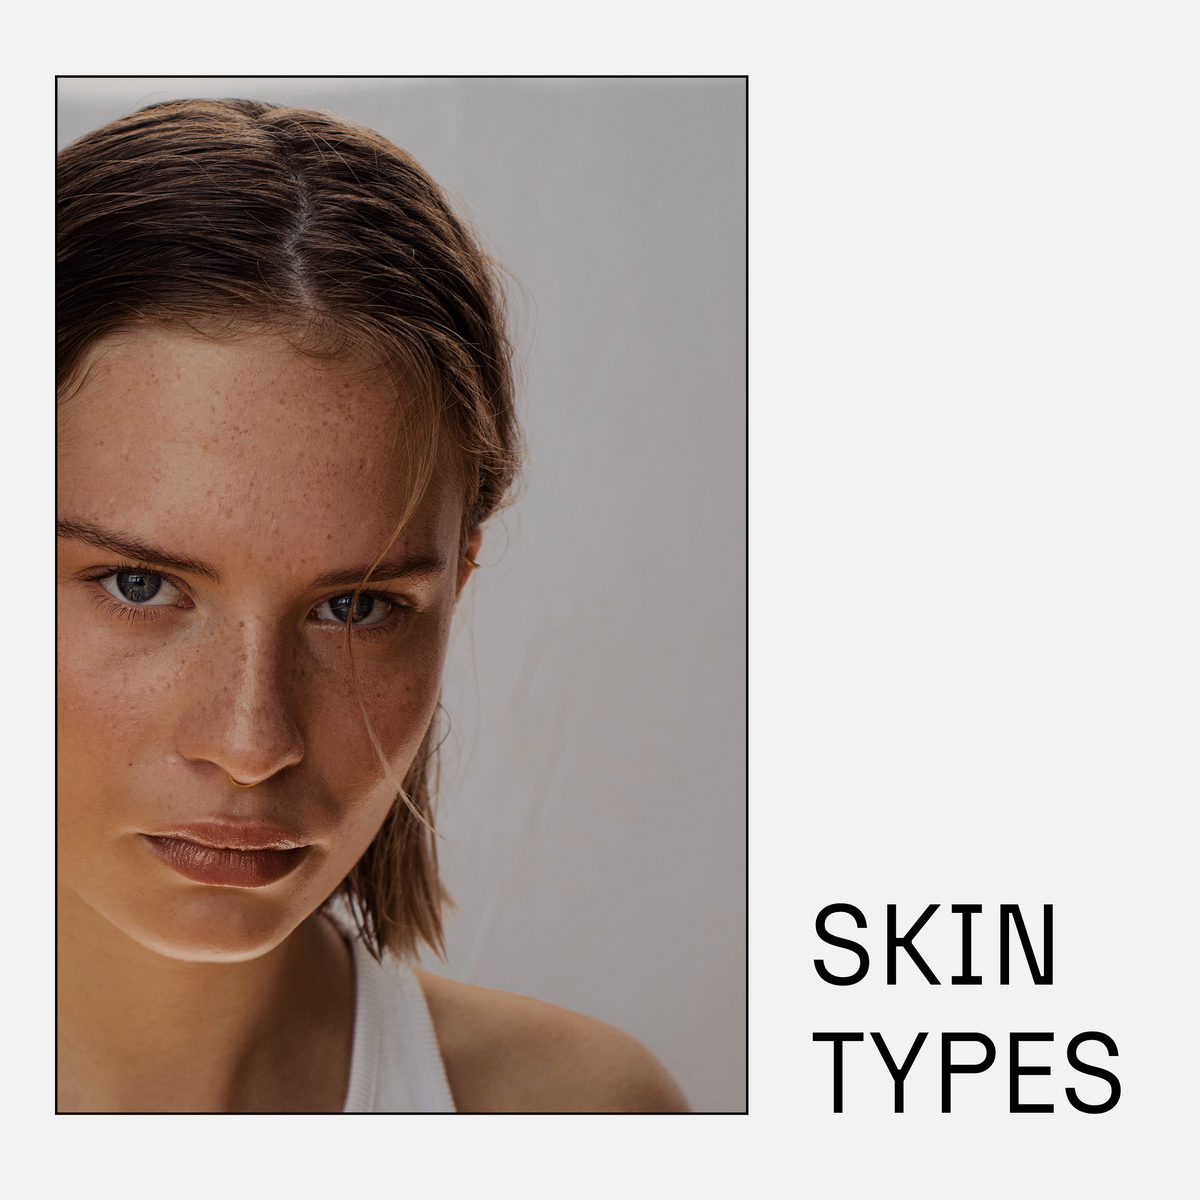 Let's Talk About Skin Types - Part Two